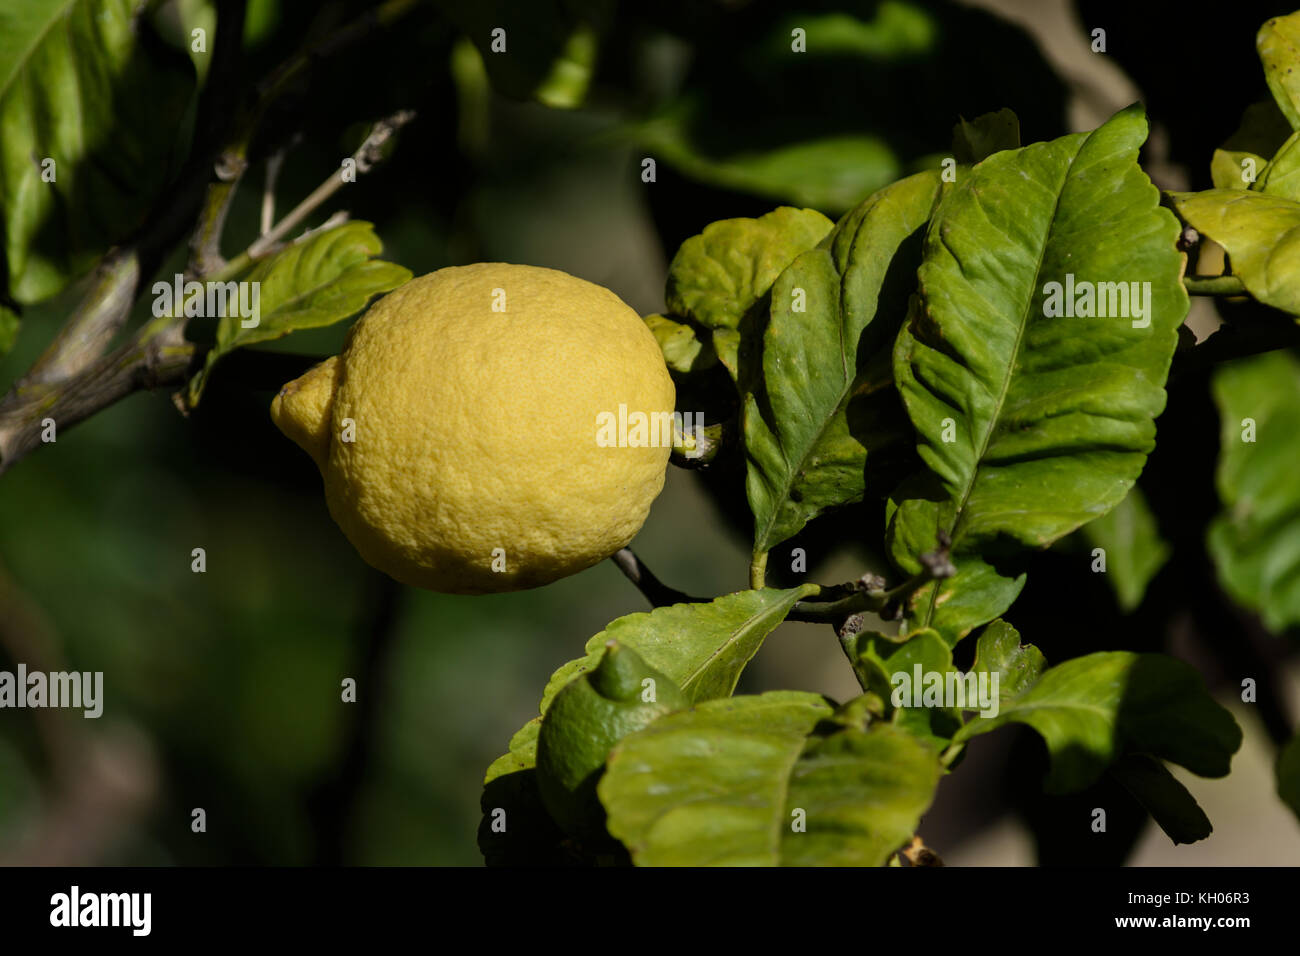 lemon among the leaves hanging on a branch of a fruit tree, Liguria, italy Stock Photo